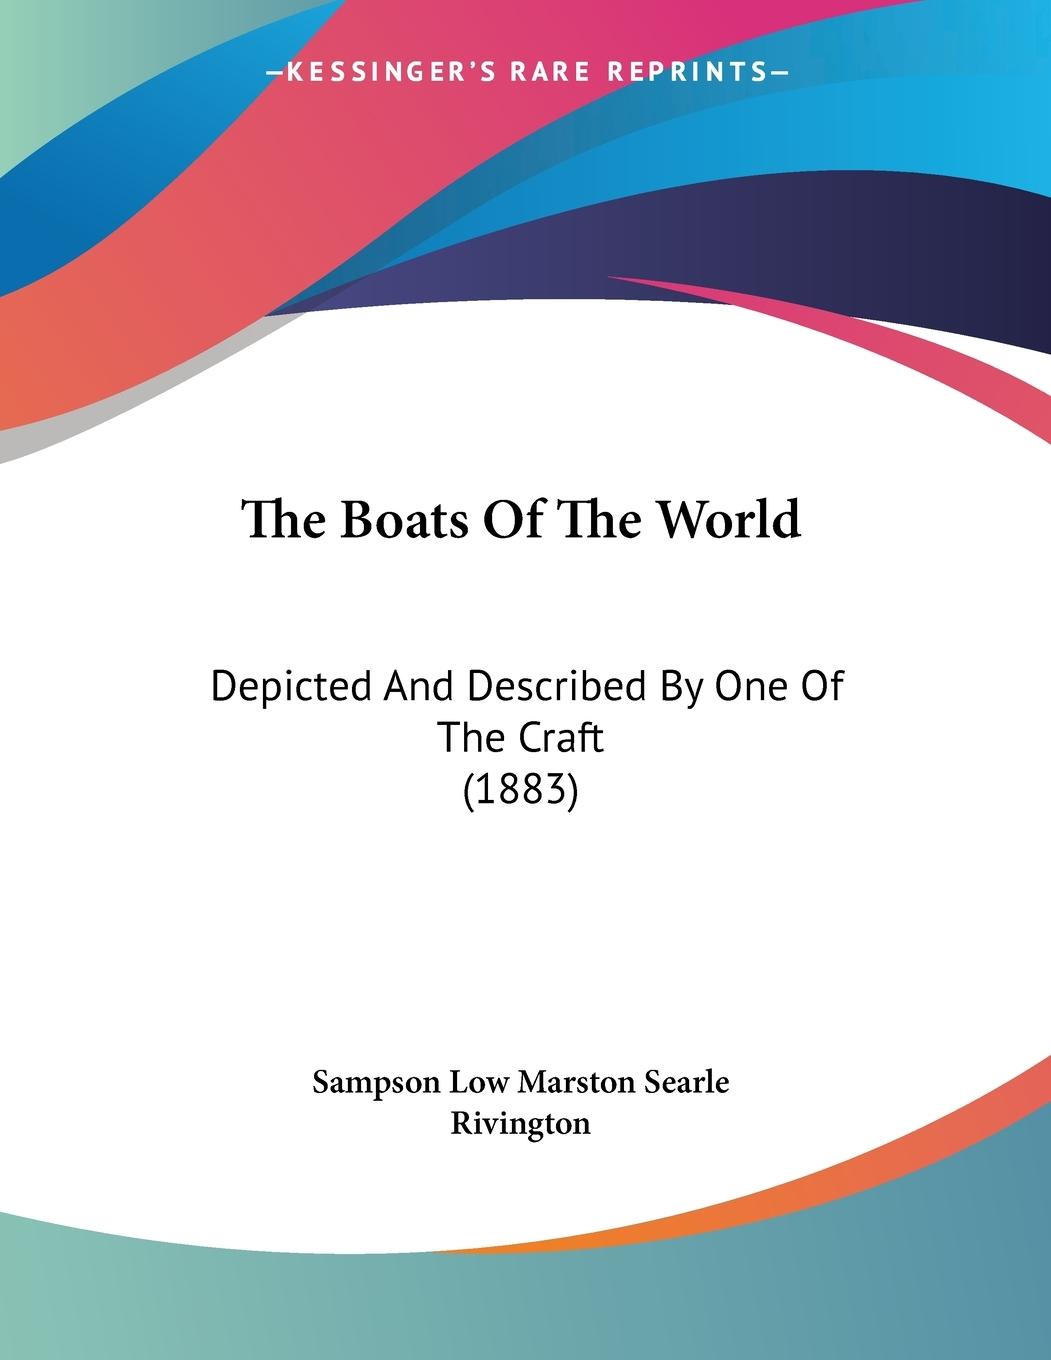 The Boats Of The World - Sampson Low Marston Searle Rivington